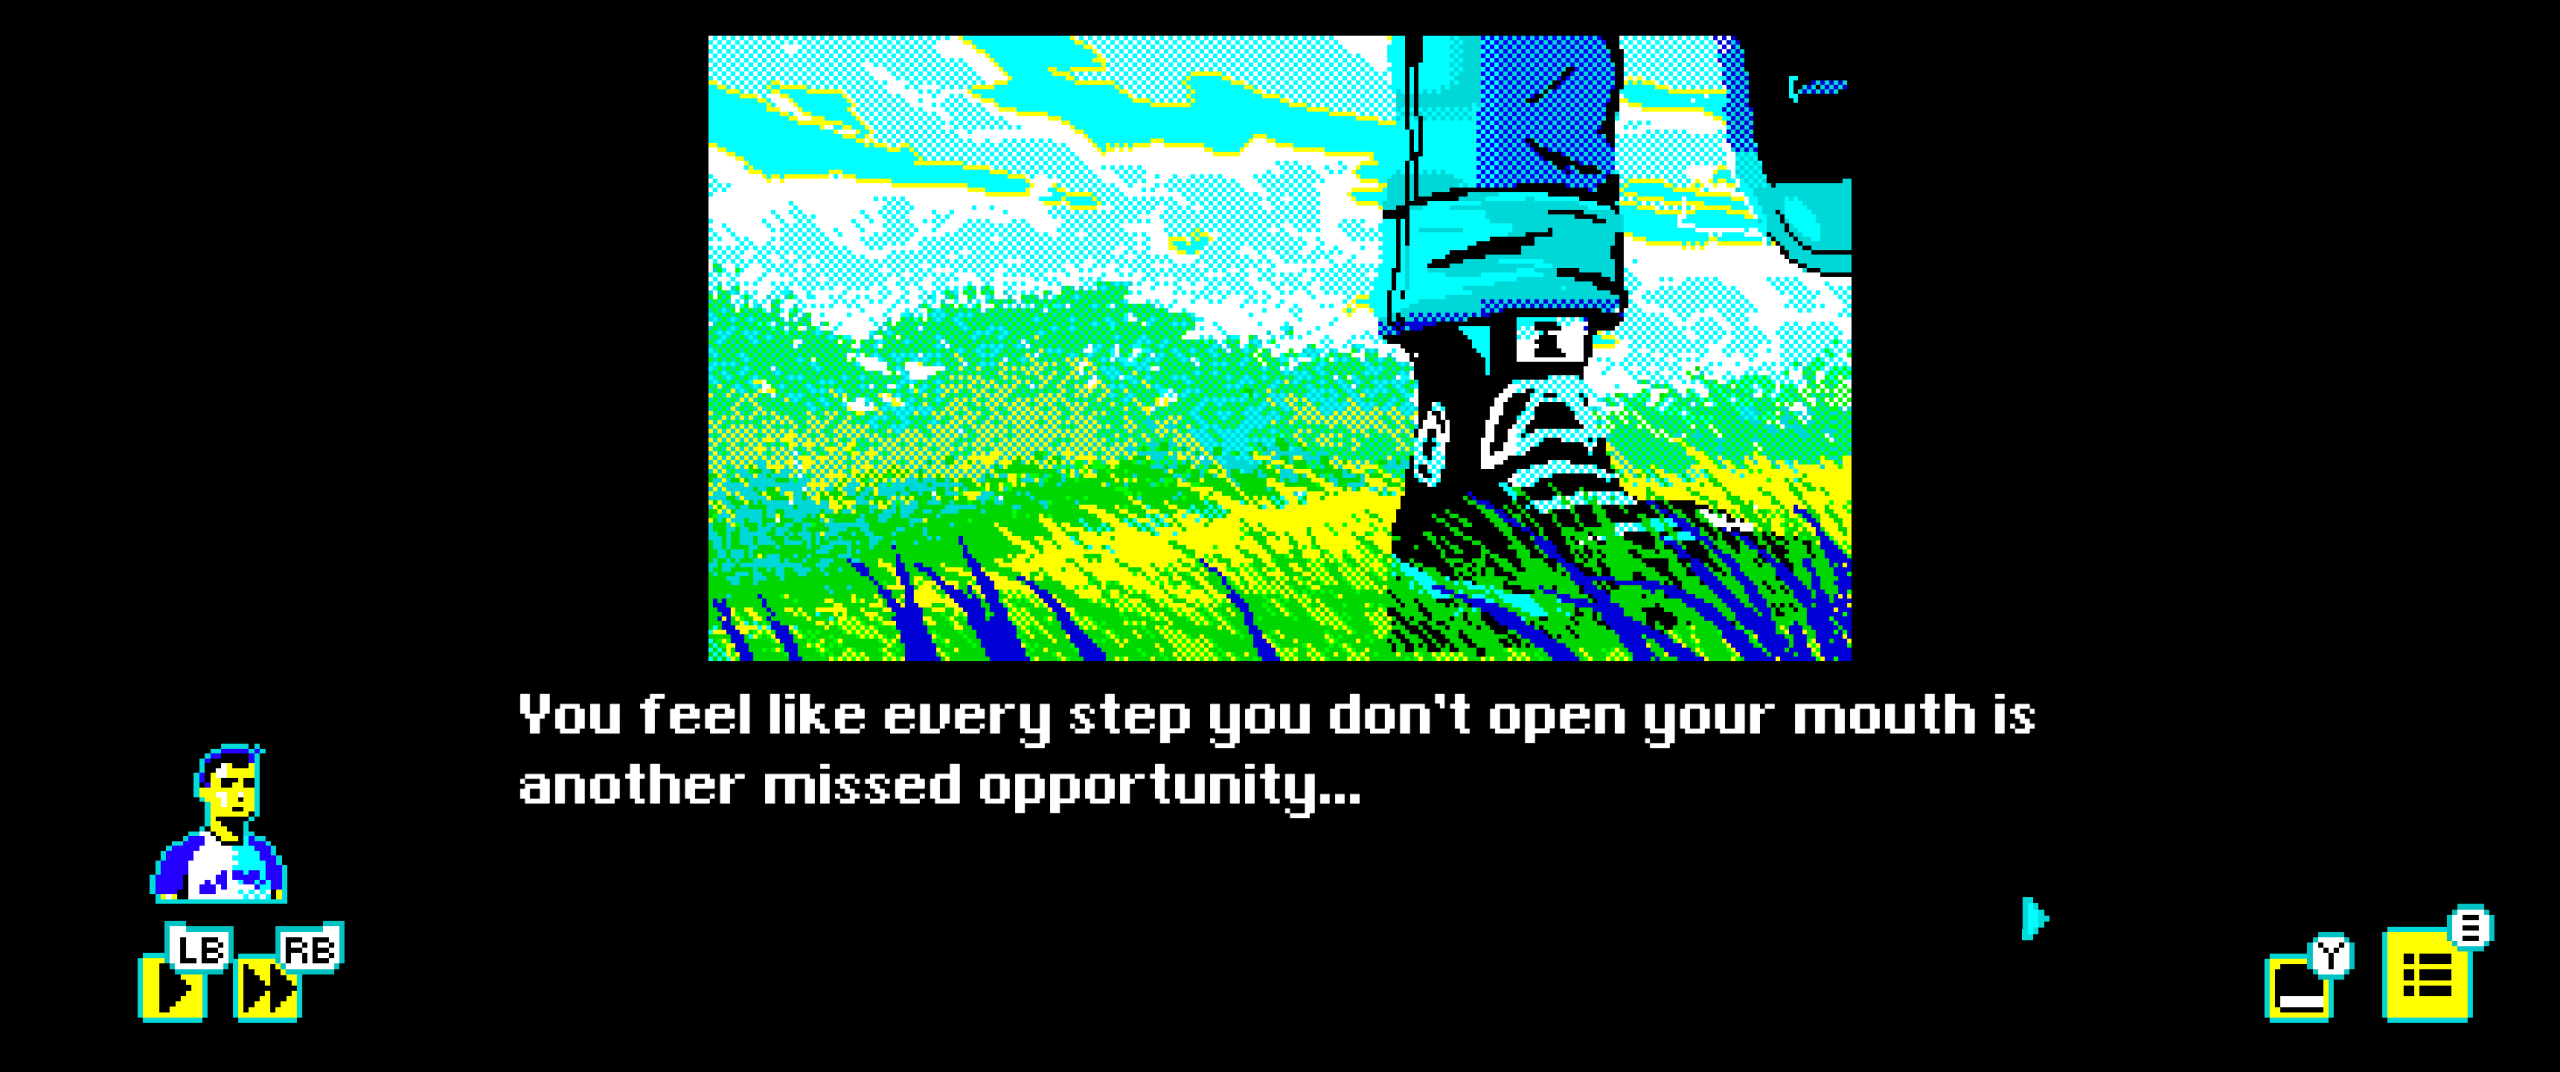 A screenshot from Varney Lake. The image is a close-up of a boy's sneakers in the grass. The text reads, "You geel like every step you don't open your mouth is another missed opportunity..."